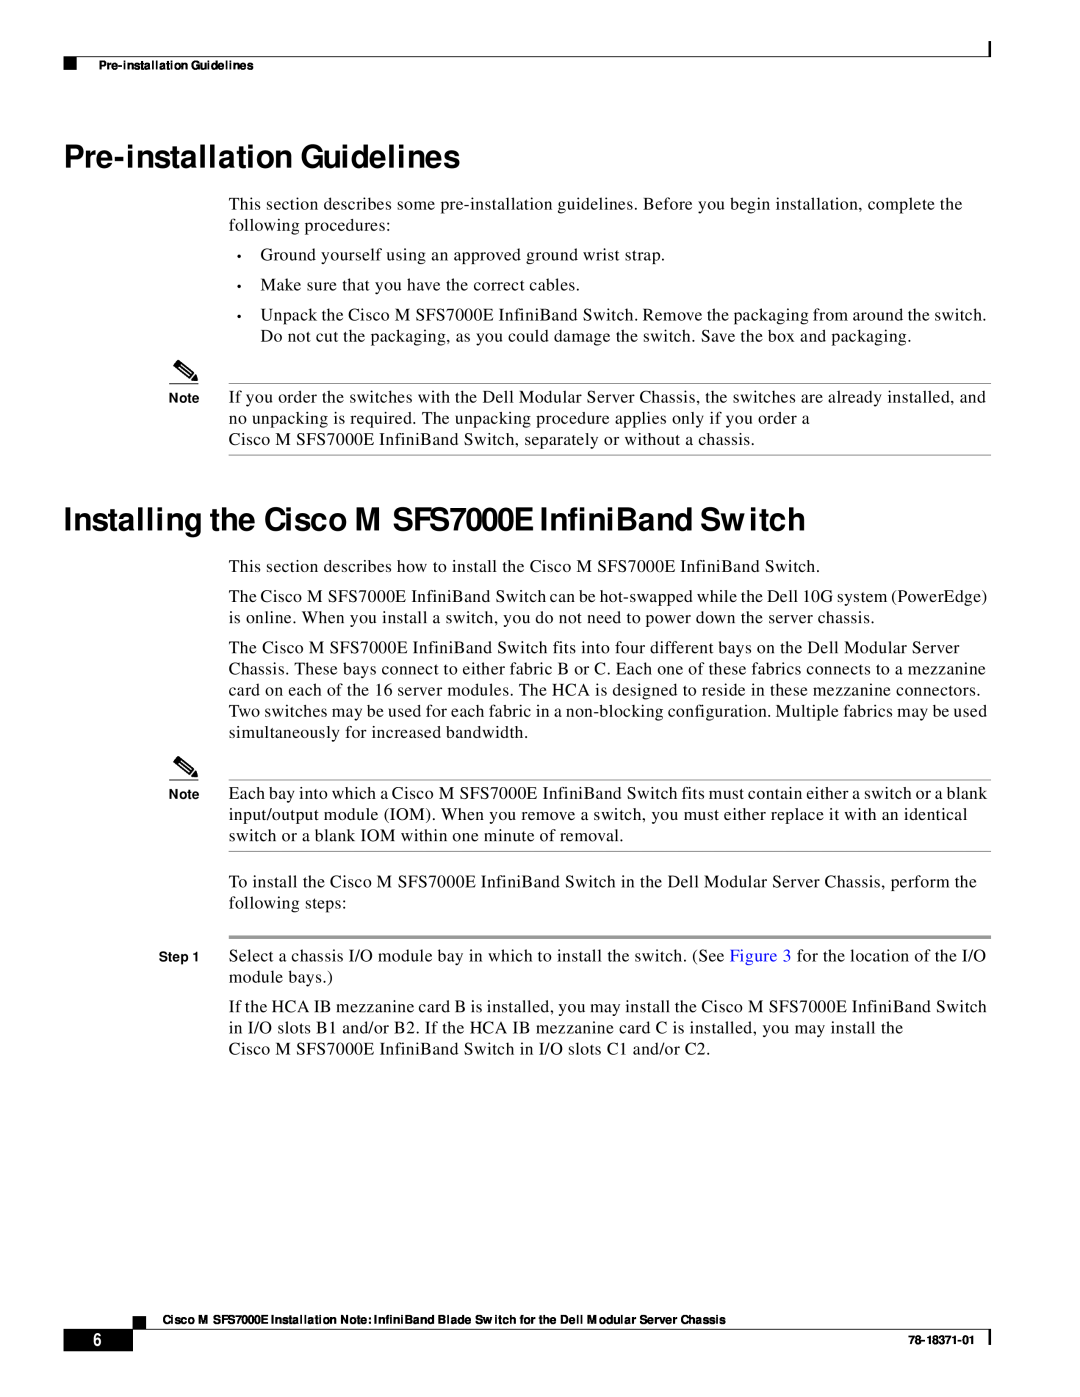 Cisco Systems specifications Pre-installation Guidelines, Installing the Cisco M SFS7000E InfiniBand Switch 